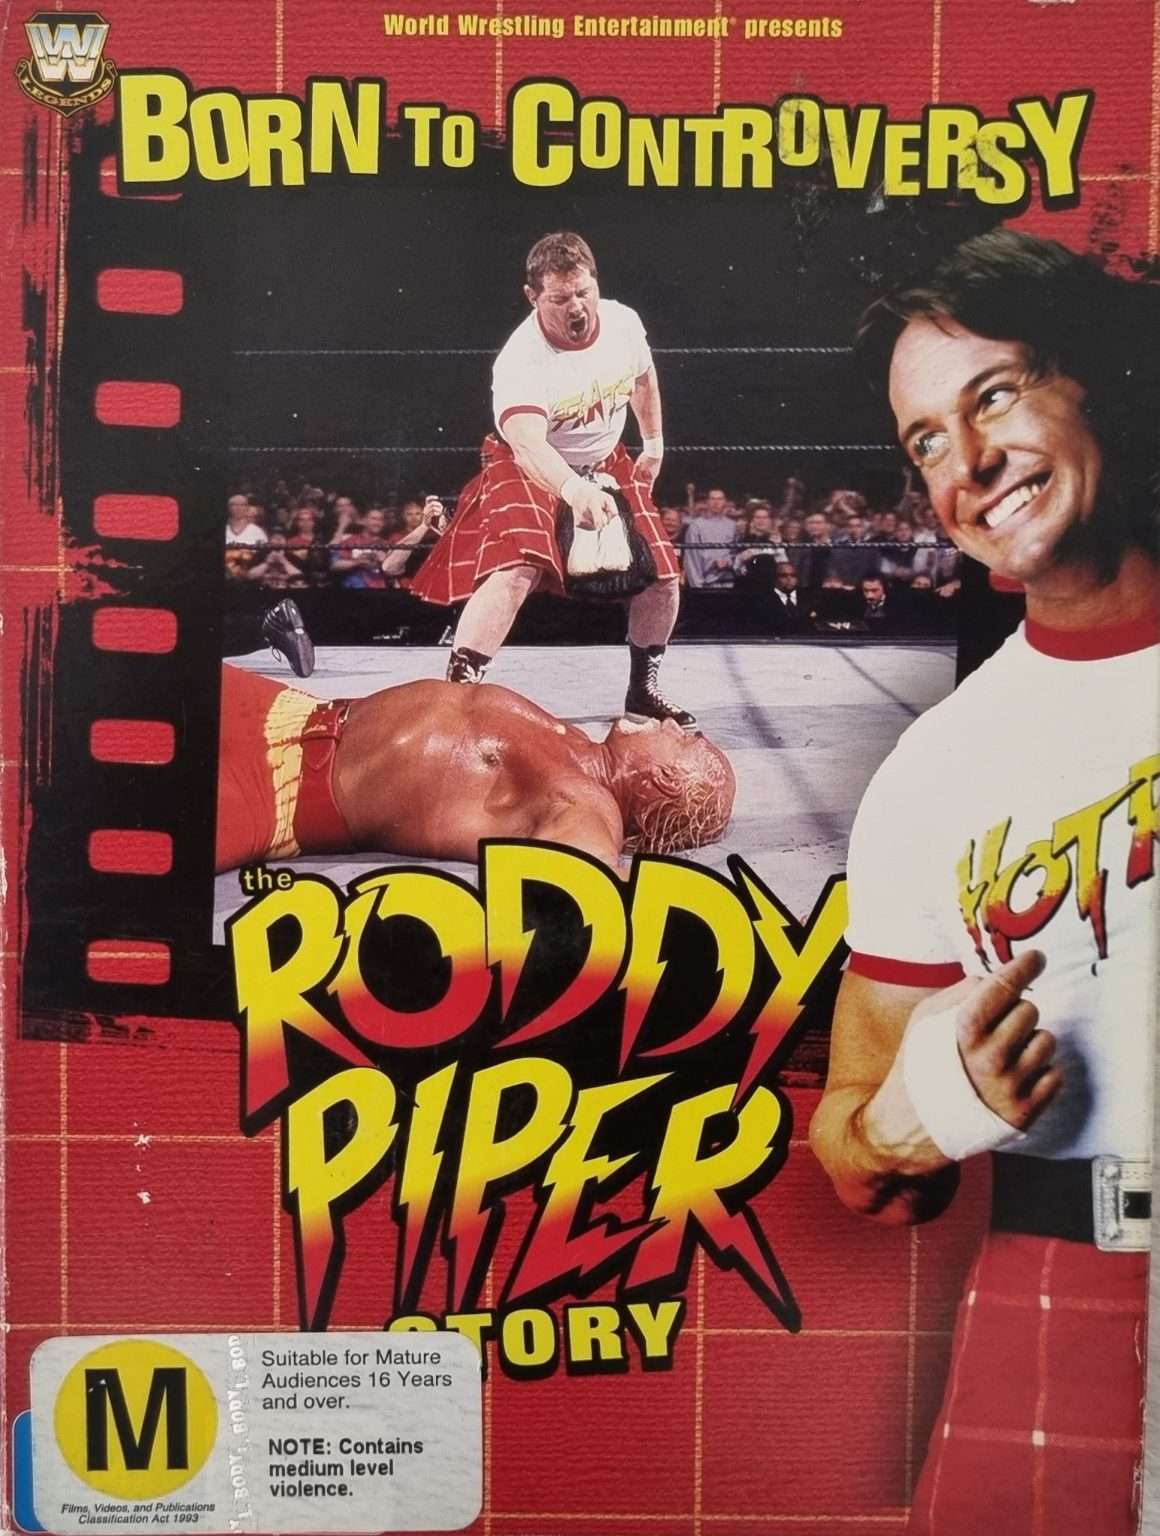 WWE: Born to Controversy - The Roddy Piper Story 3 Disc Set